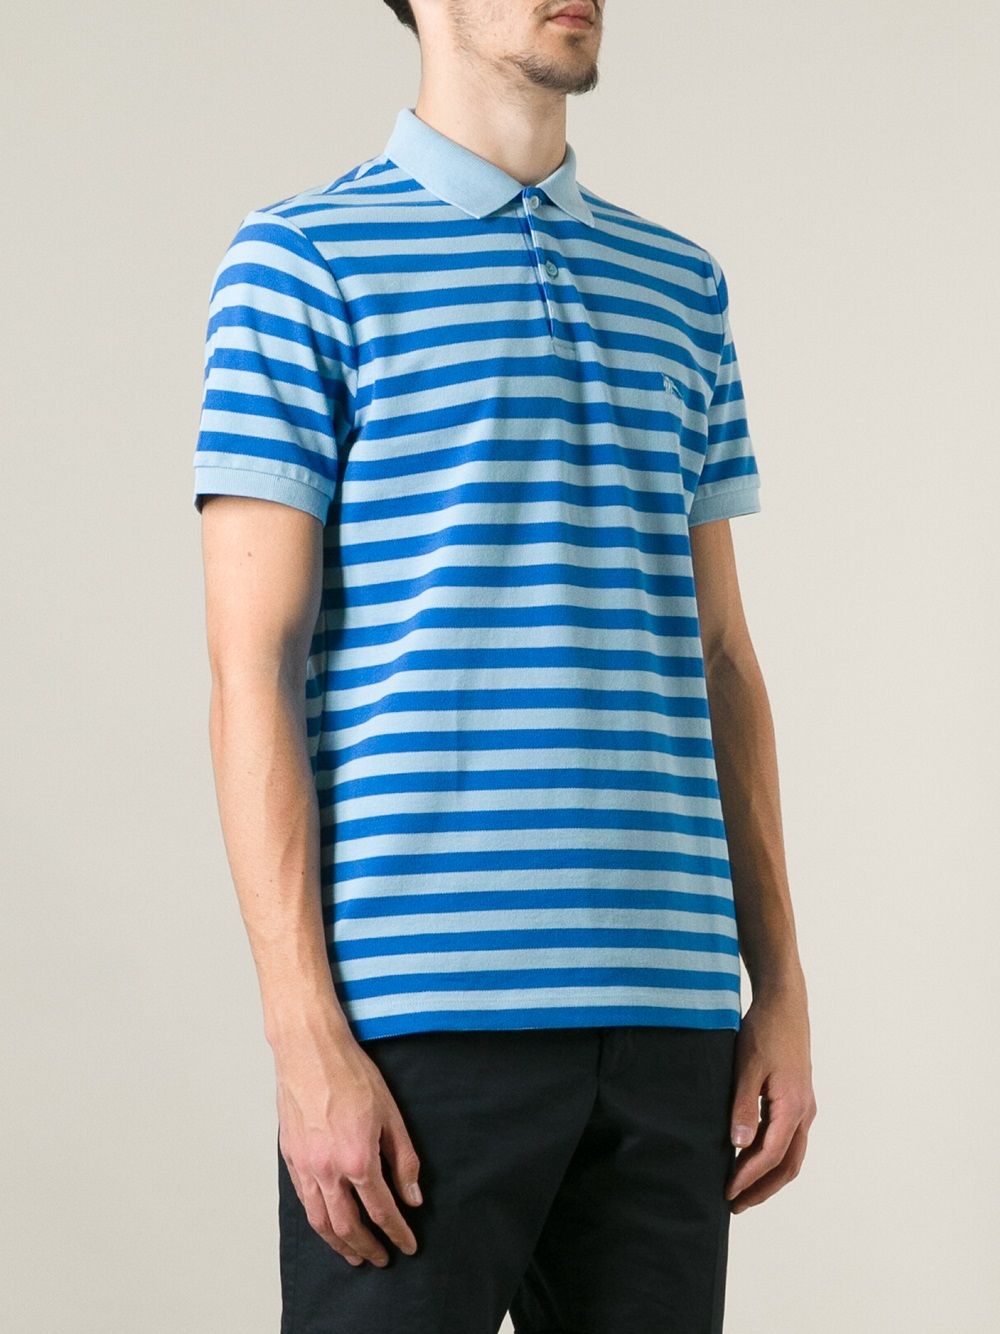 Lyst - Burberry Brit Stripe Polo Shirt in Blue for Men